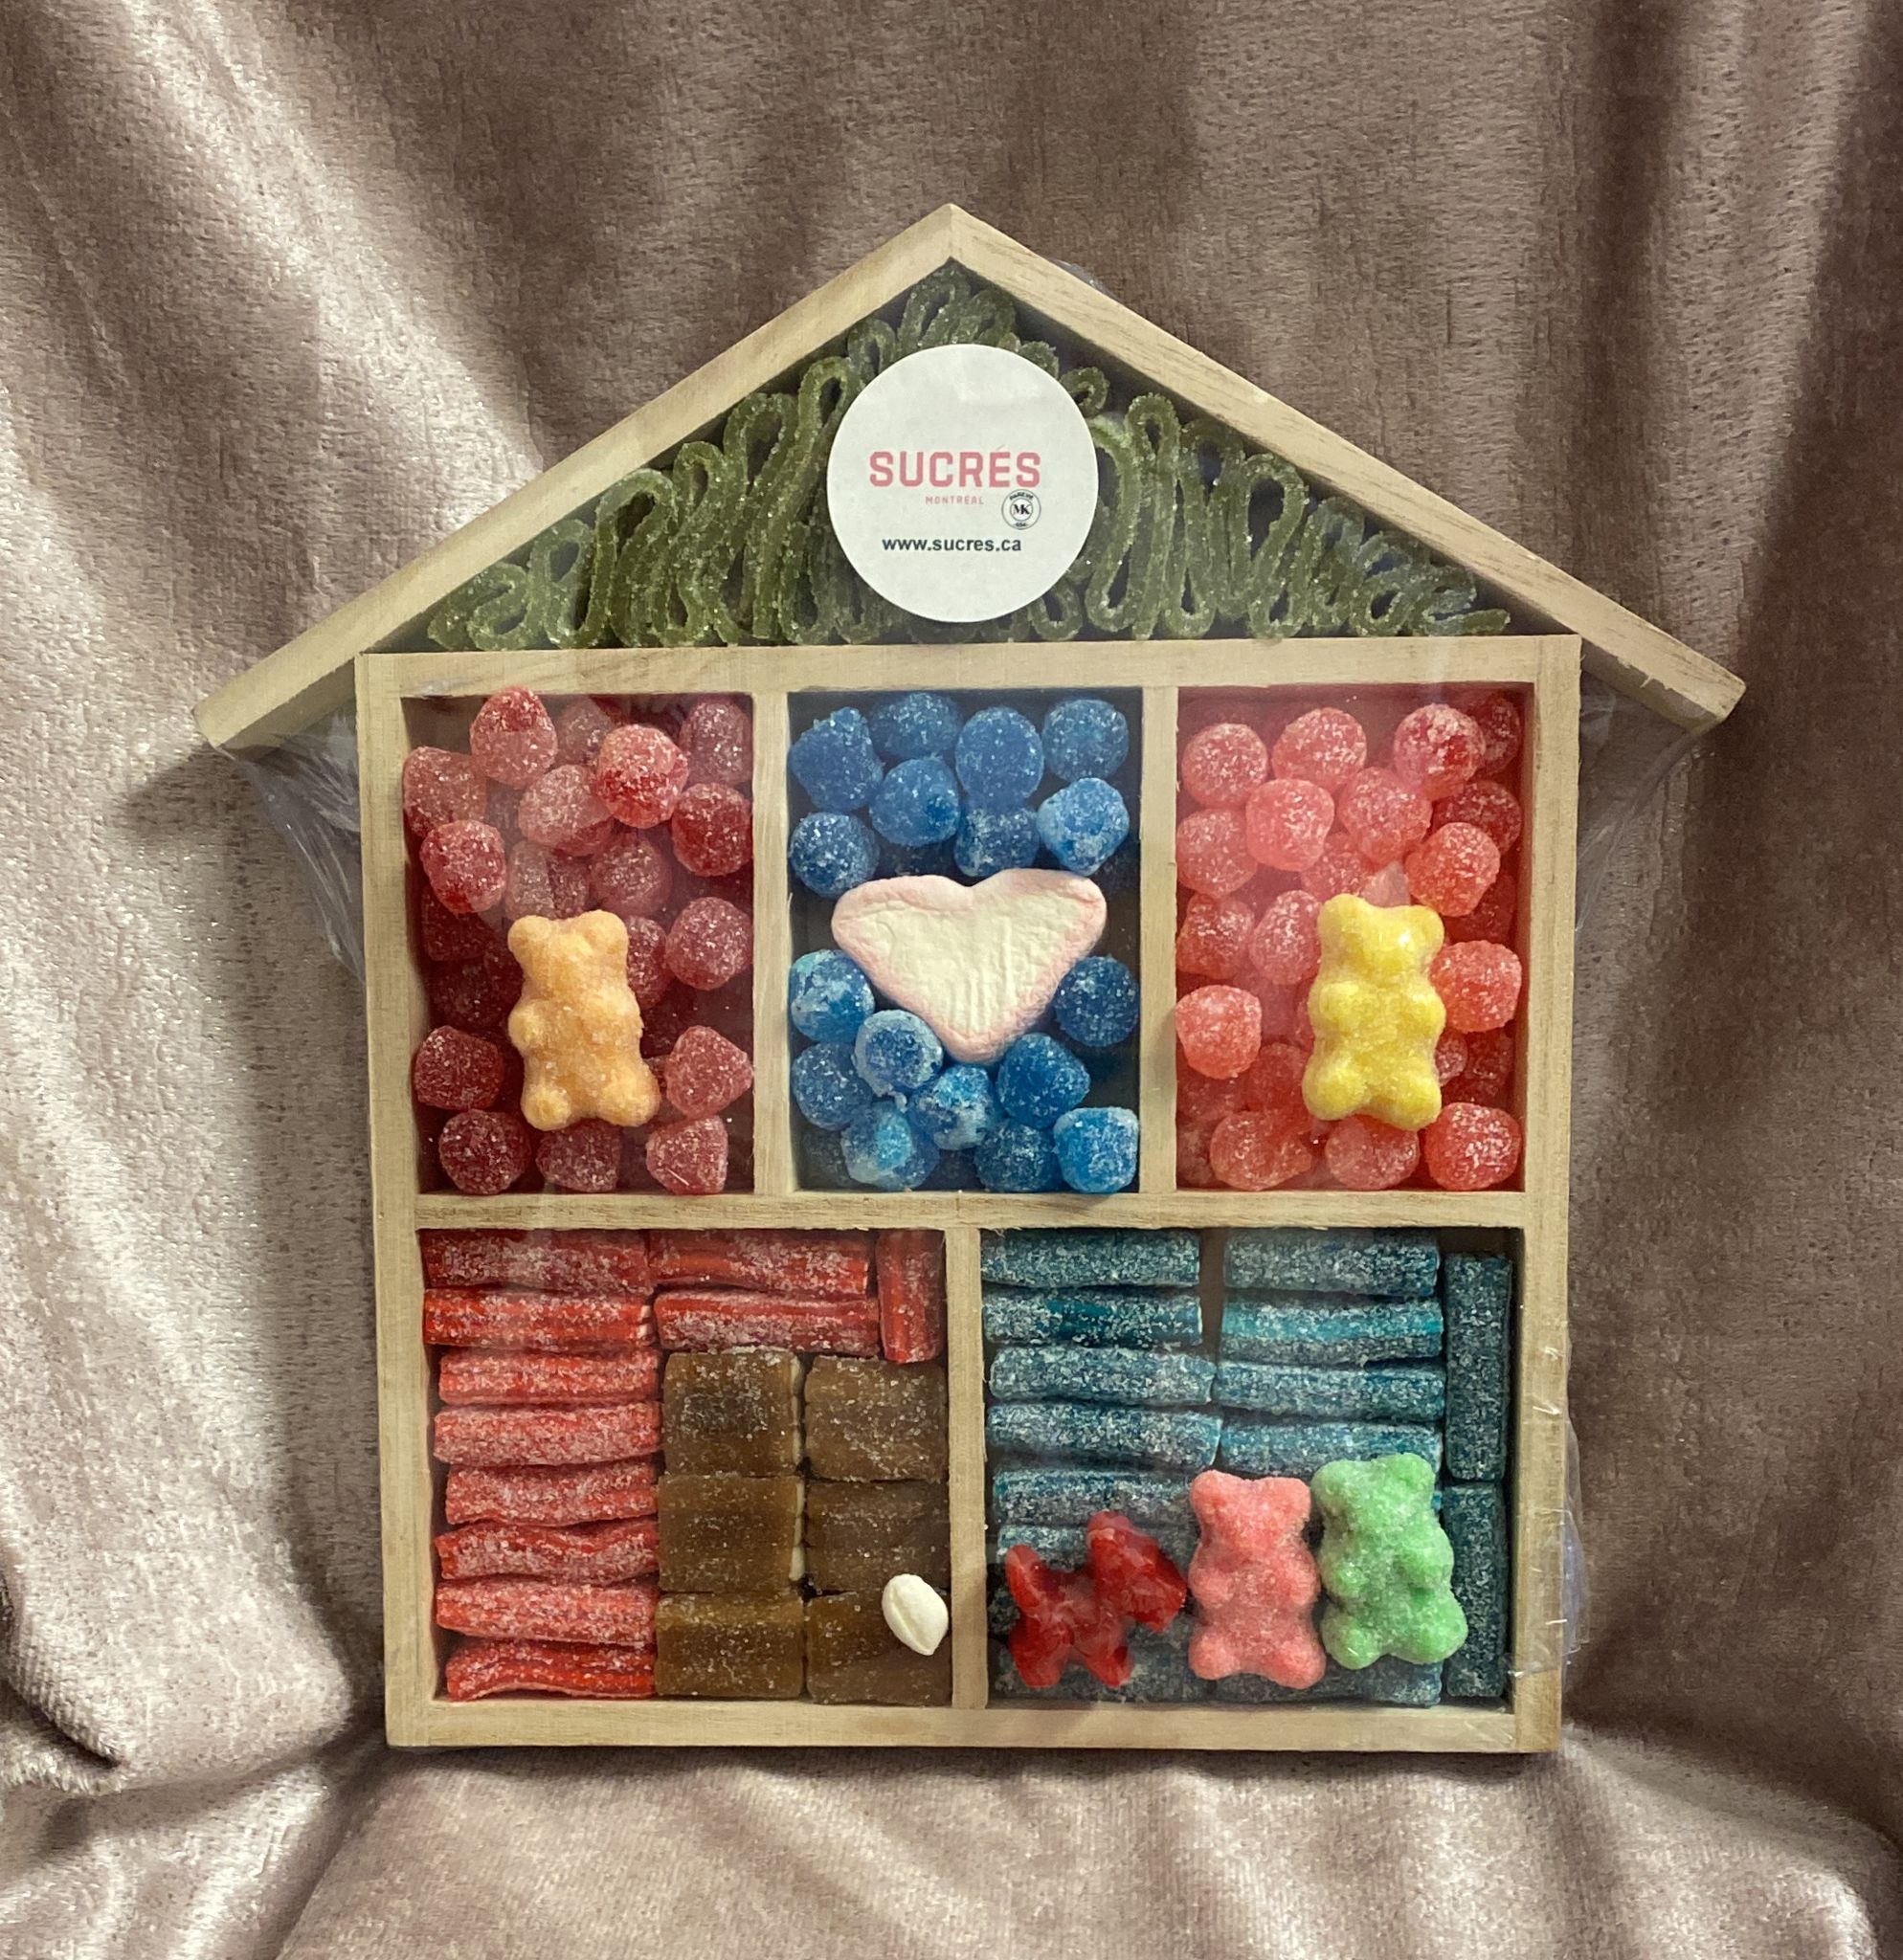 Wooden House Candy, Nuts & Chocolate Gift Basket • Candy Gifts • Gift  Baskets by Type • Oh! Nuts®